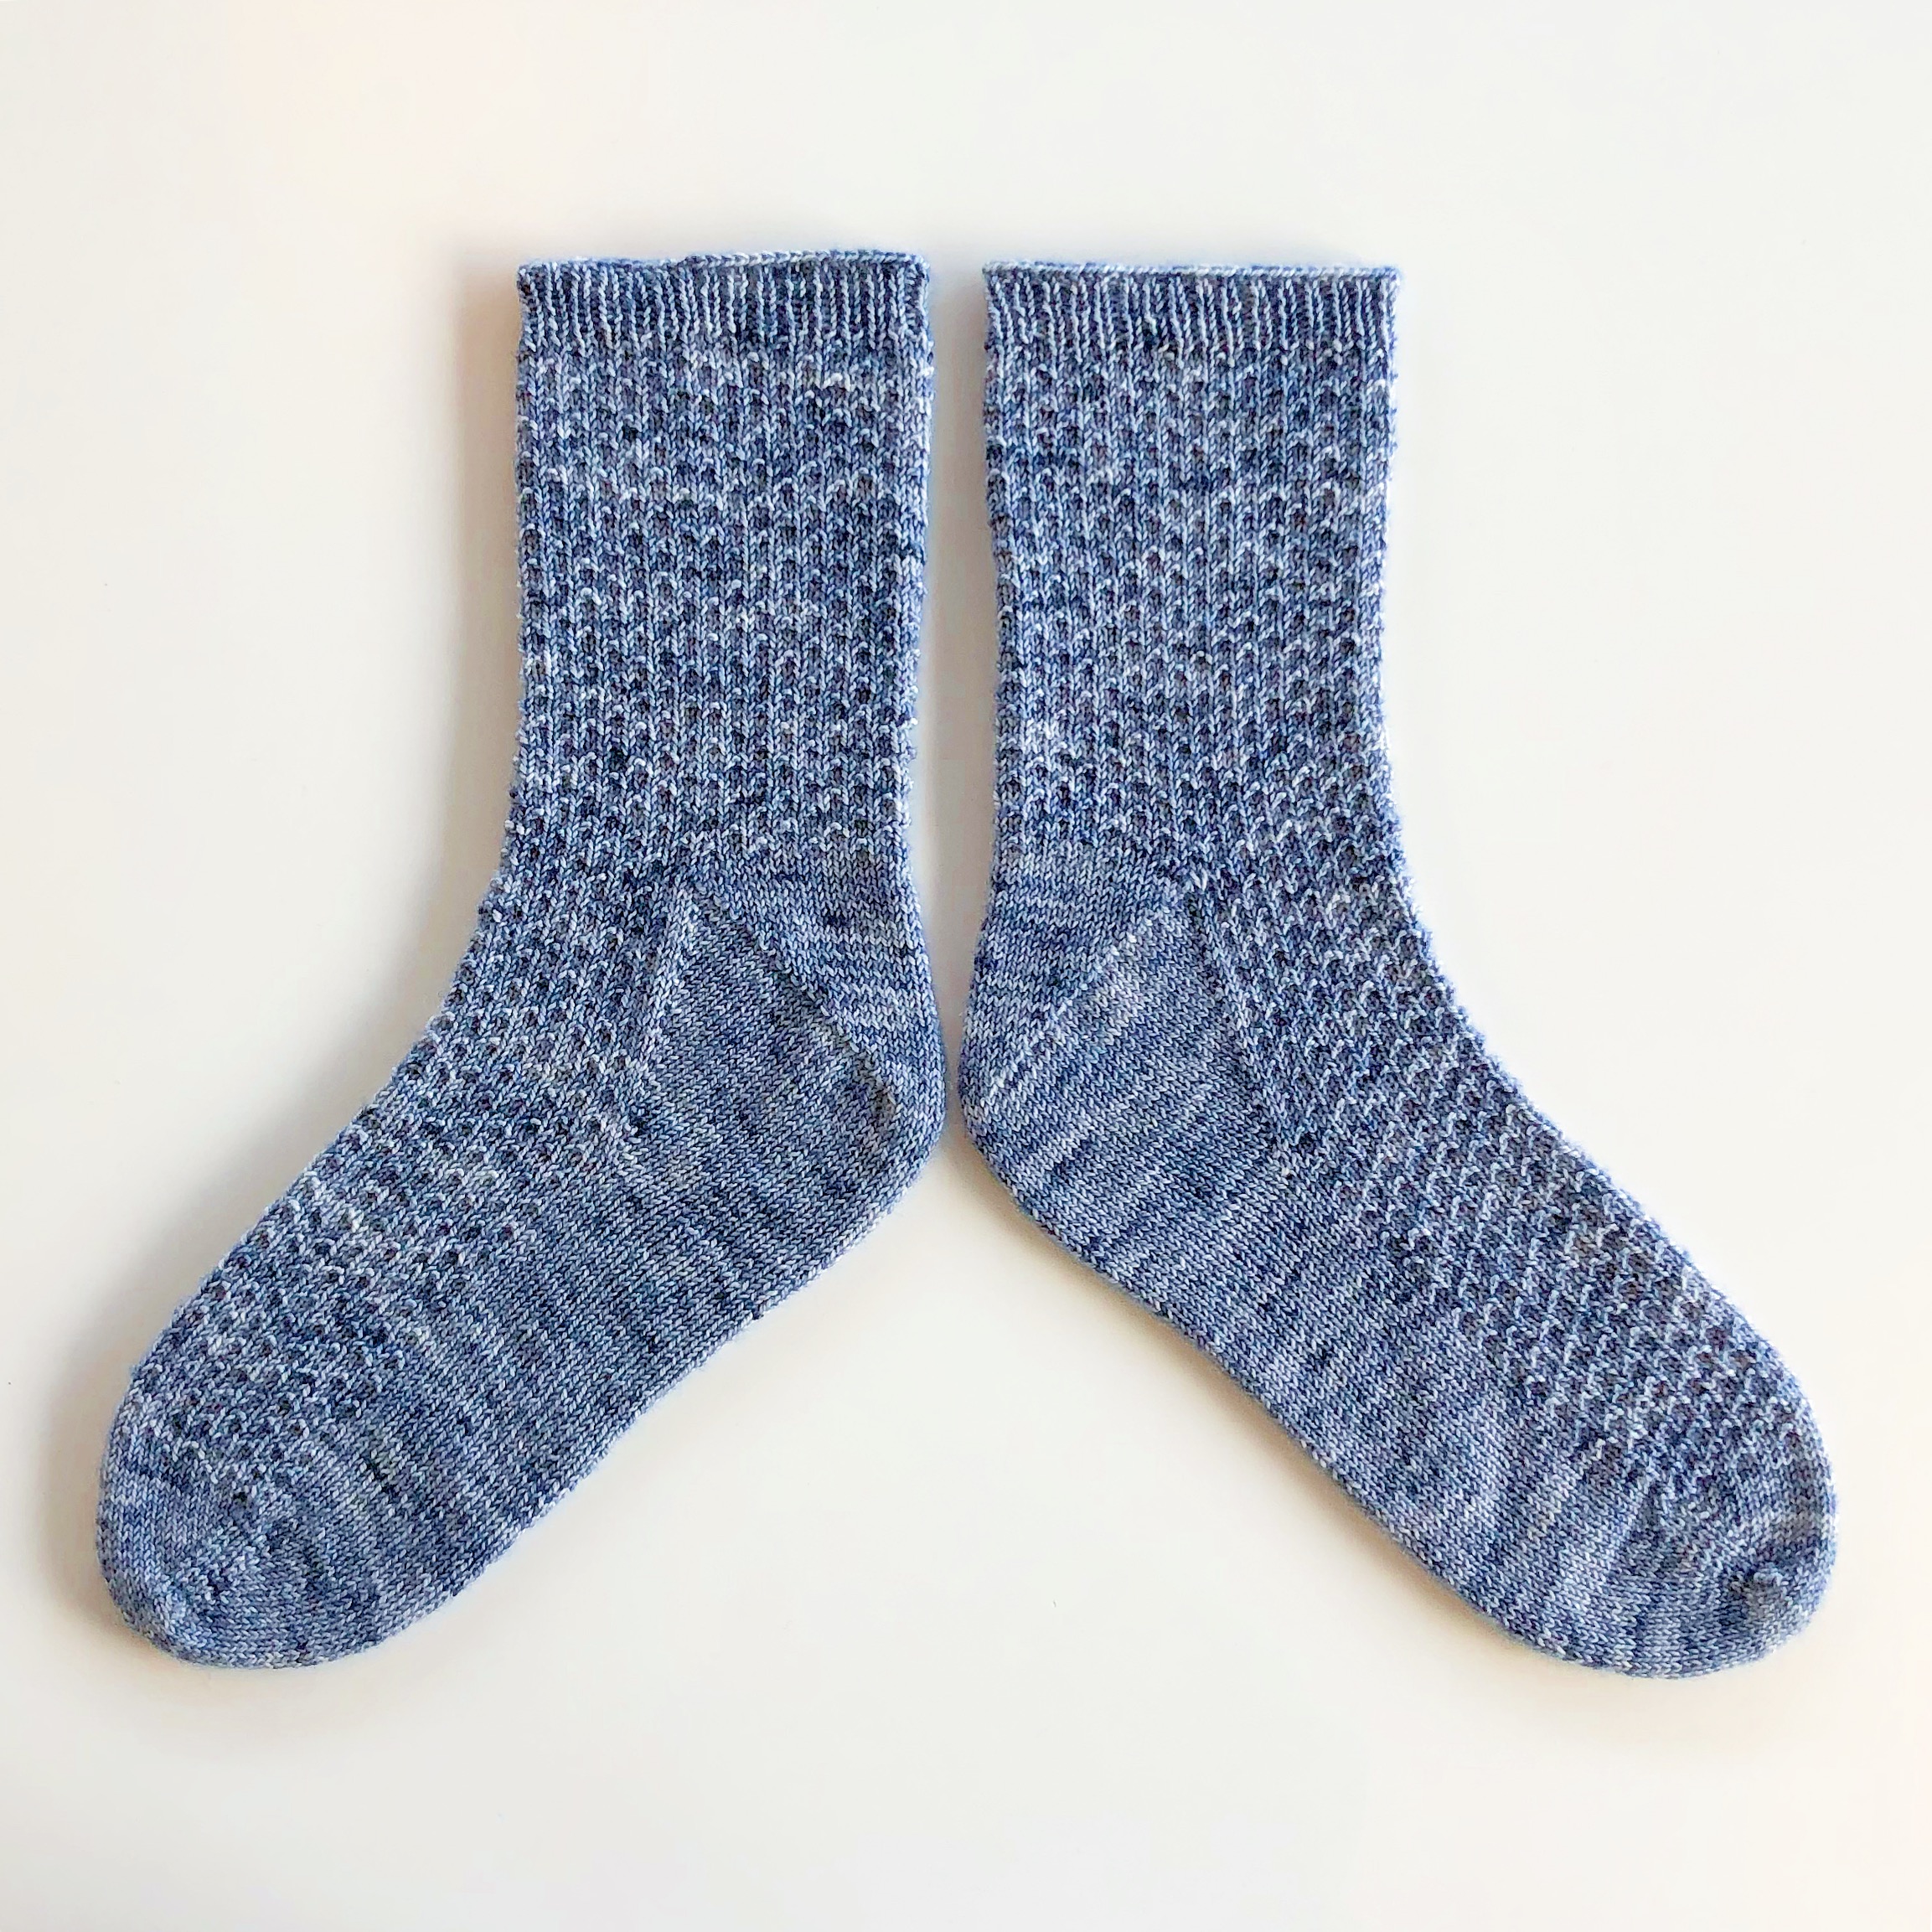 Fast and Easy Socks in Fingering Weight yarn - how to count rounds rows in  knitting by knittingILove 